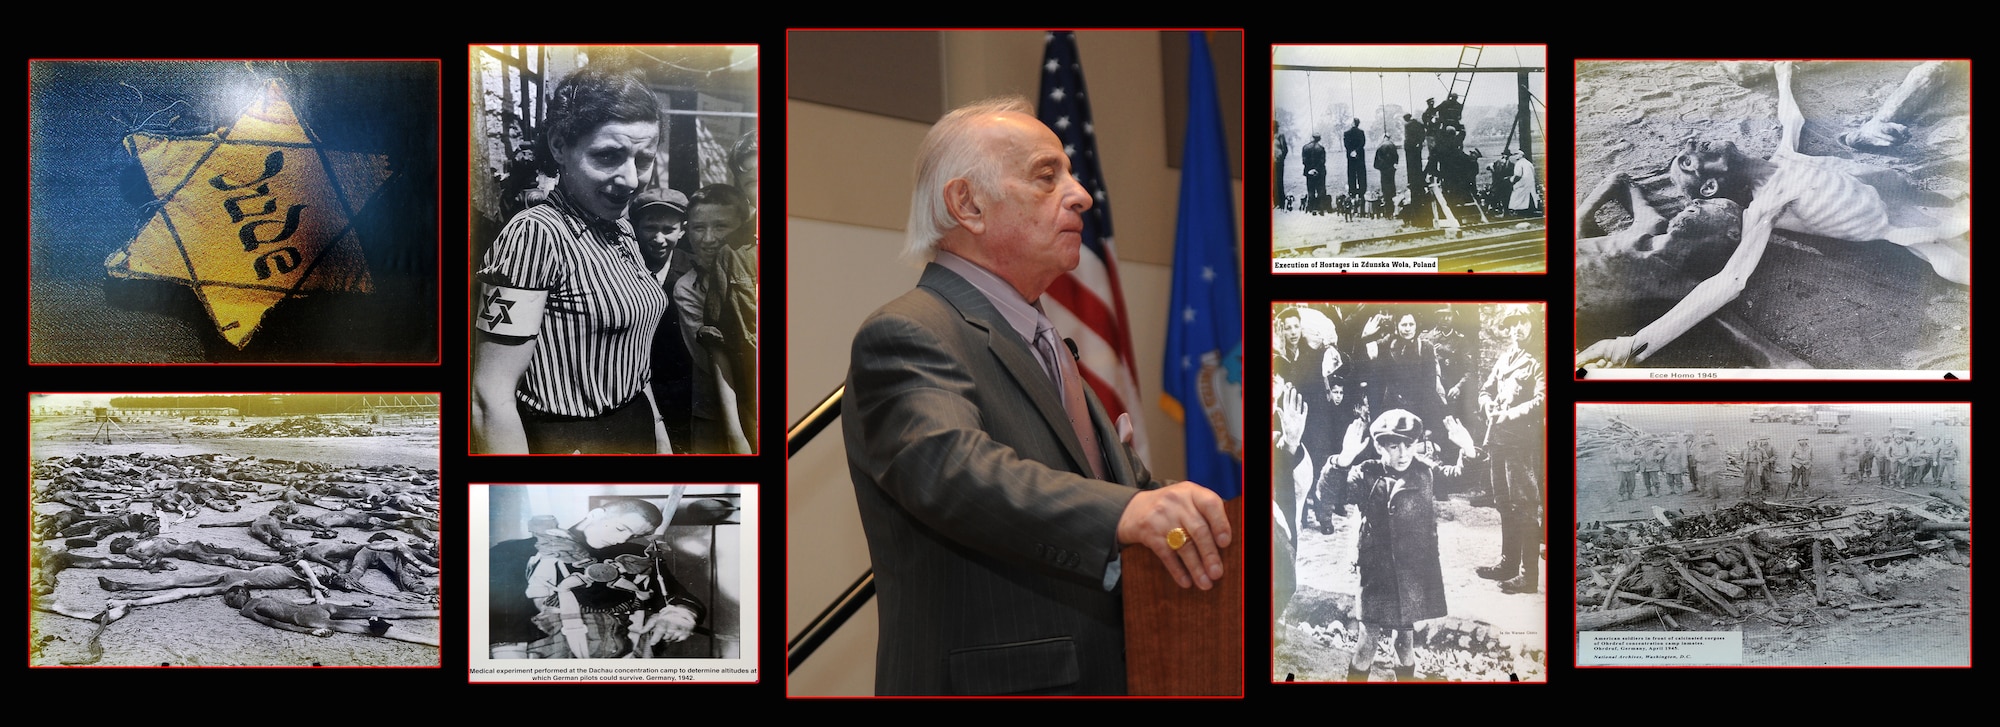 Jack Alder, Buckleys Guest Speaker, shares his experience during World War II. Mr. Alder is a survivor of the Nazi concentration camps. Surrounding his photo are photographs taken during the occupation of the Nazi regime and the liberation of the concentration camps.